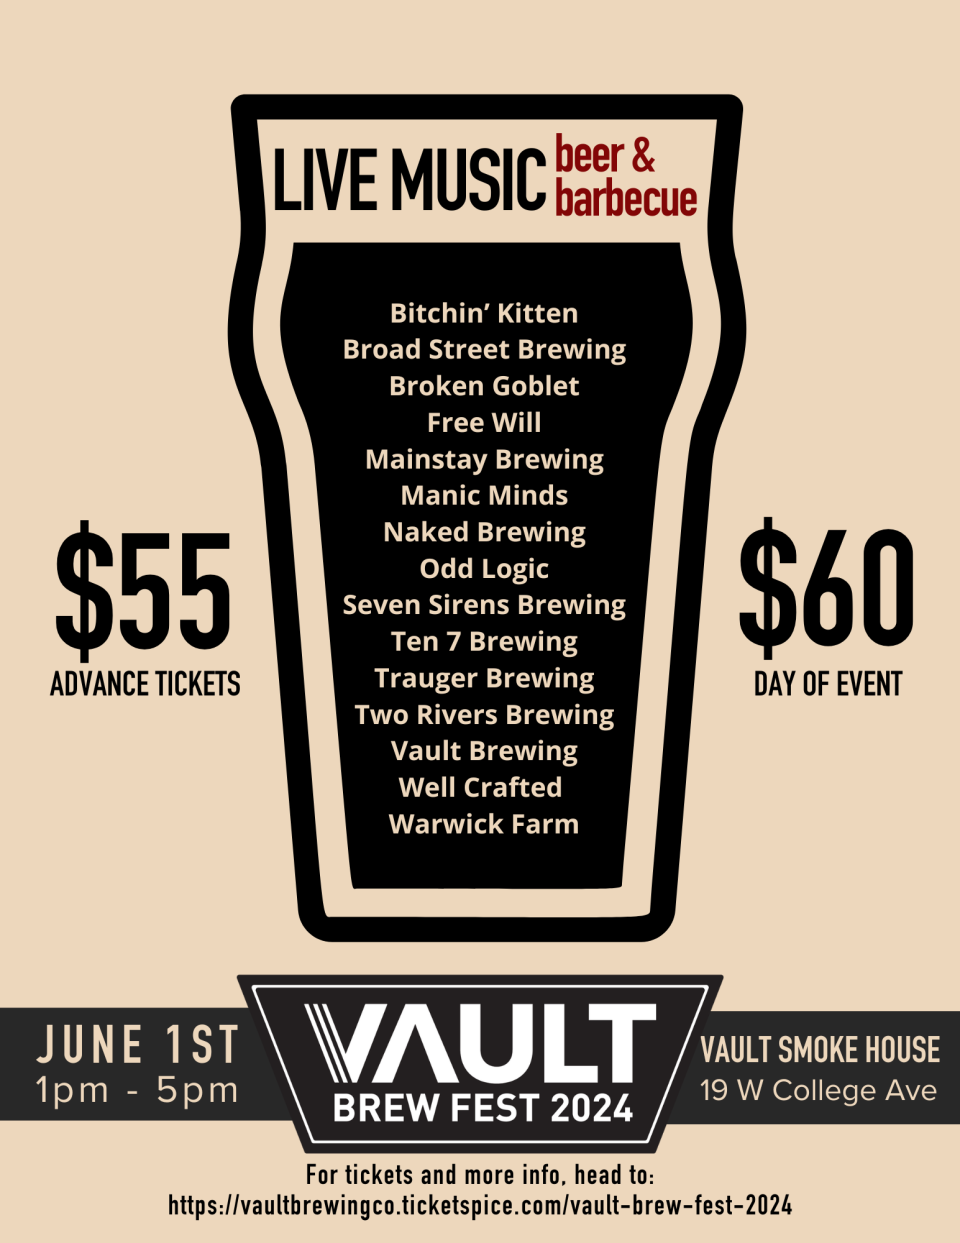 Vault Brew Fest will takes place June 1, 2024 at Vault Smoke House in Yardley, featuring local and regional breweries, food and live music.